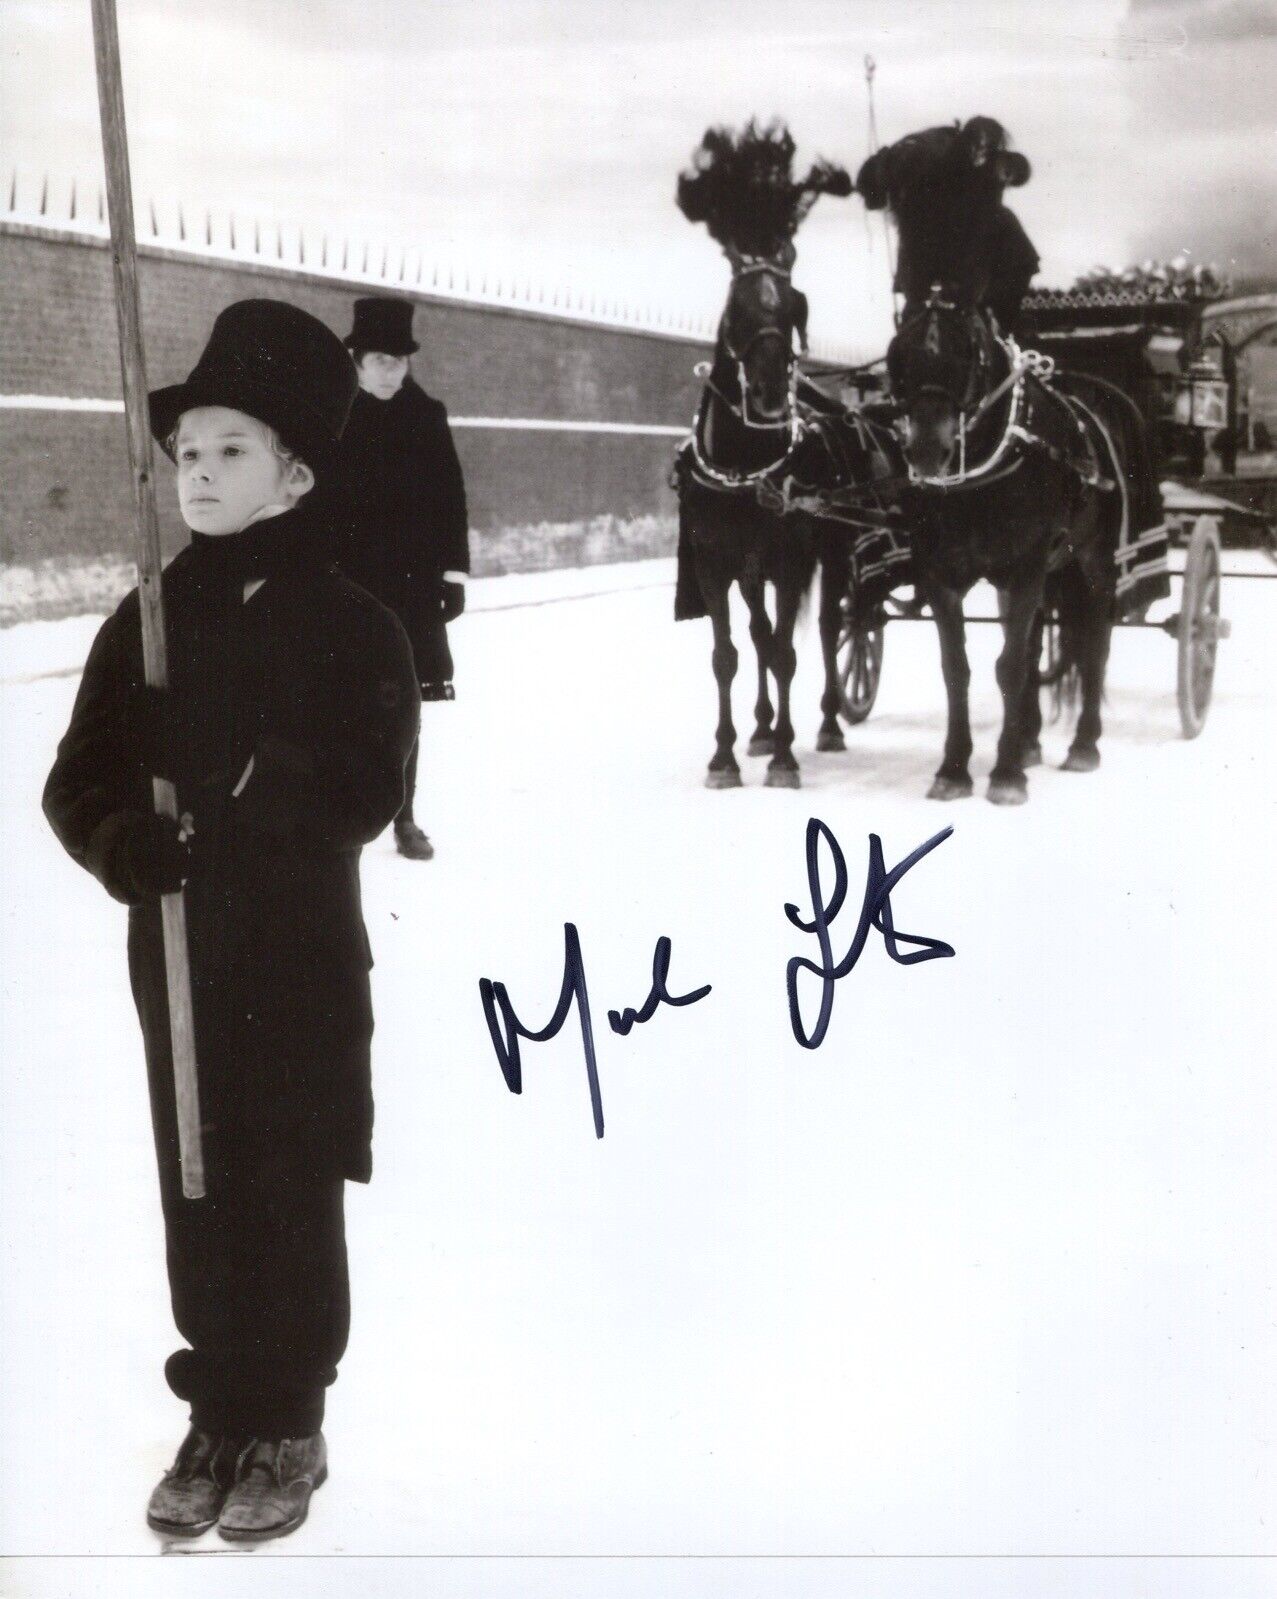 Oliver! movie 8x10 scene Photo Poster painting signed by actor Mark Lester IMAGE No9